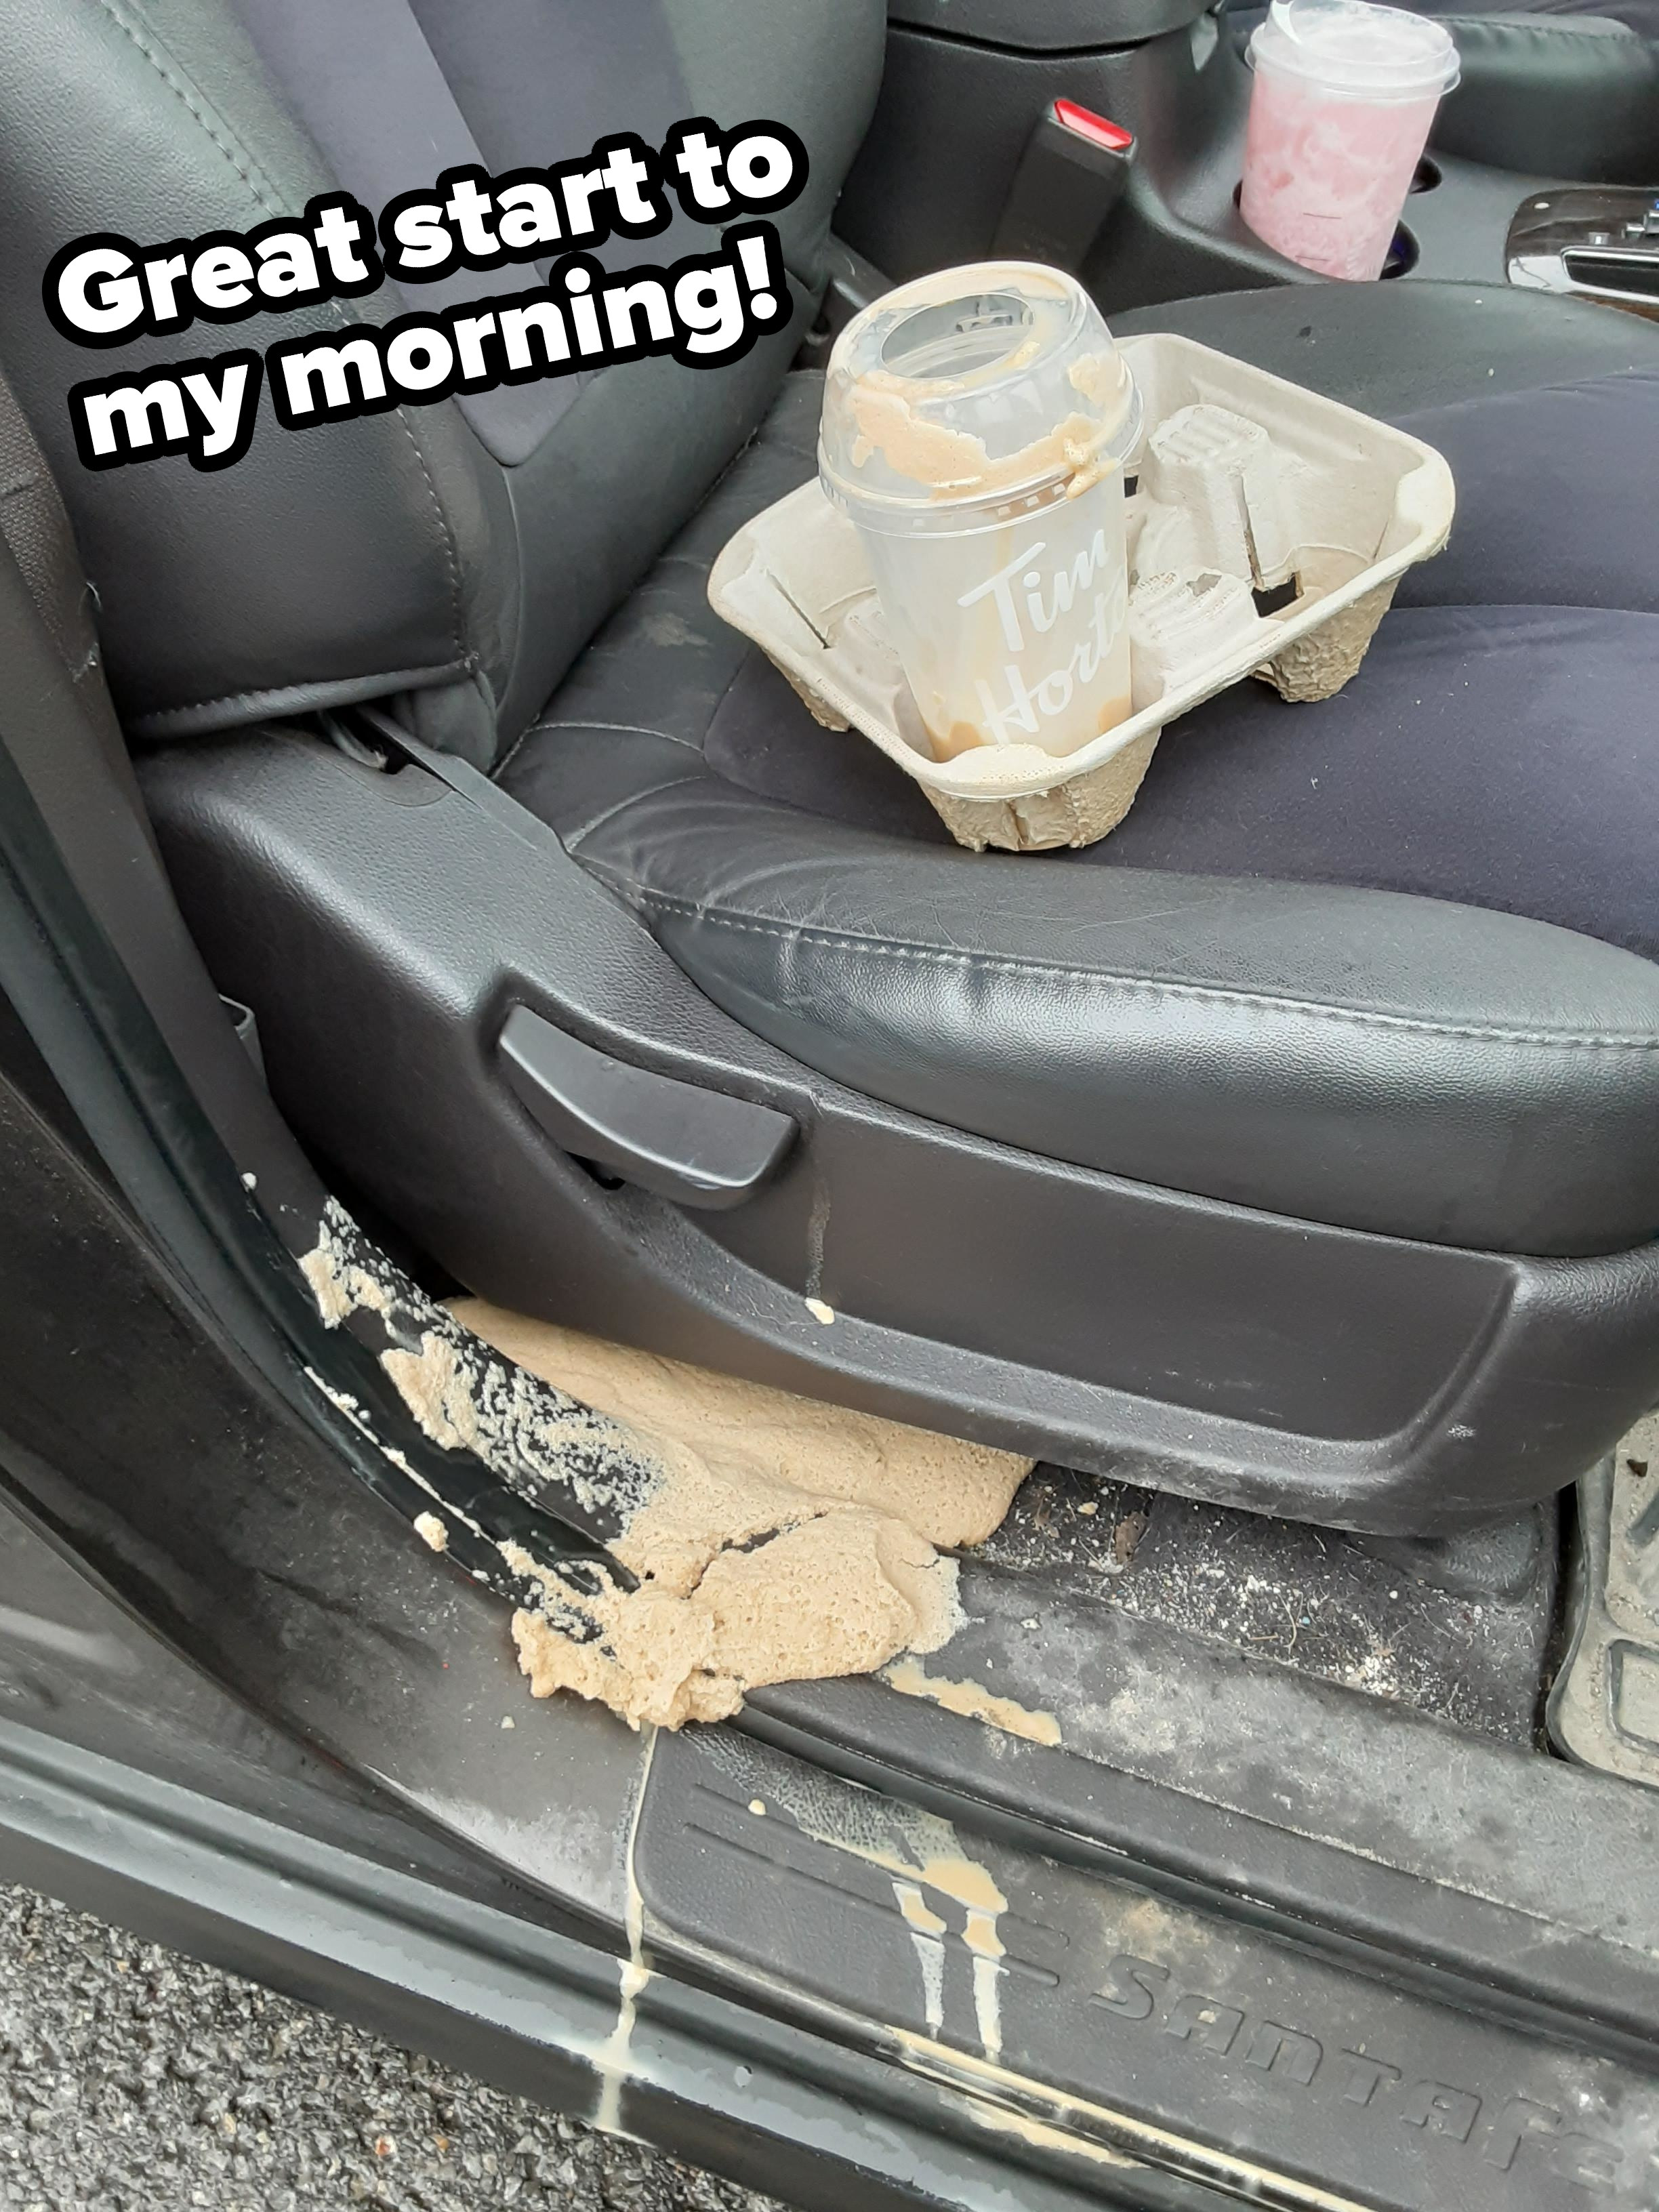 coffee all over the car seat and the words &quot;Great start to my morning&quot;